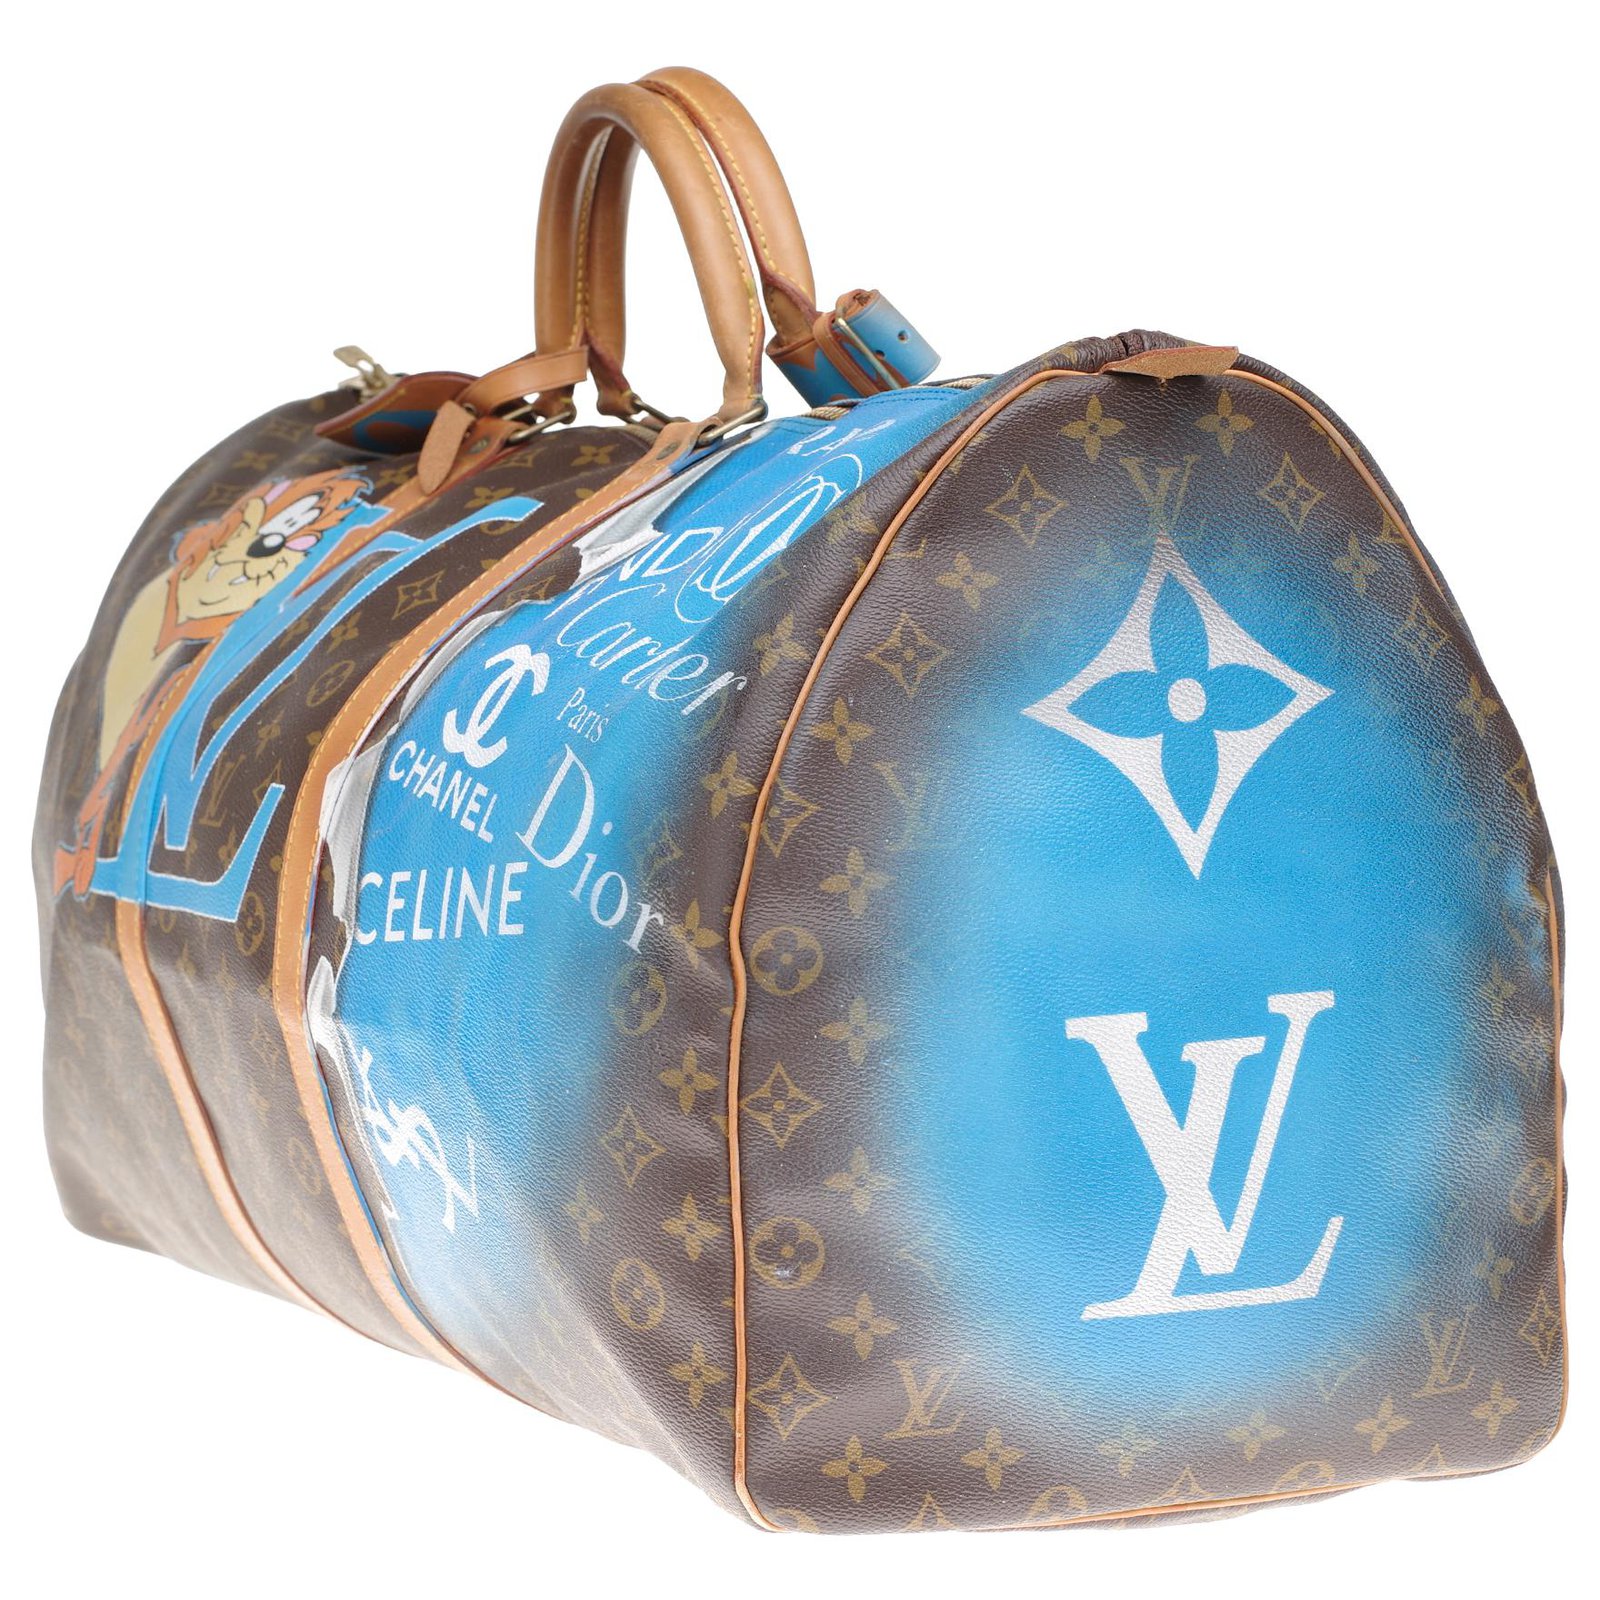 Customized LV Keepall 60 Travel bag in monogram canvas F*** #66 !